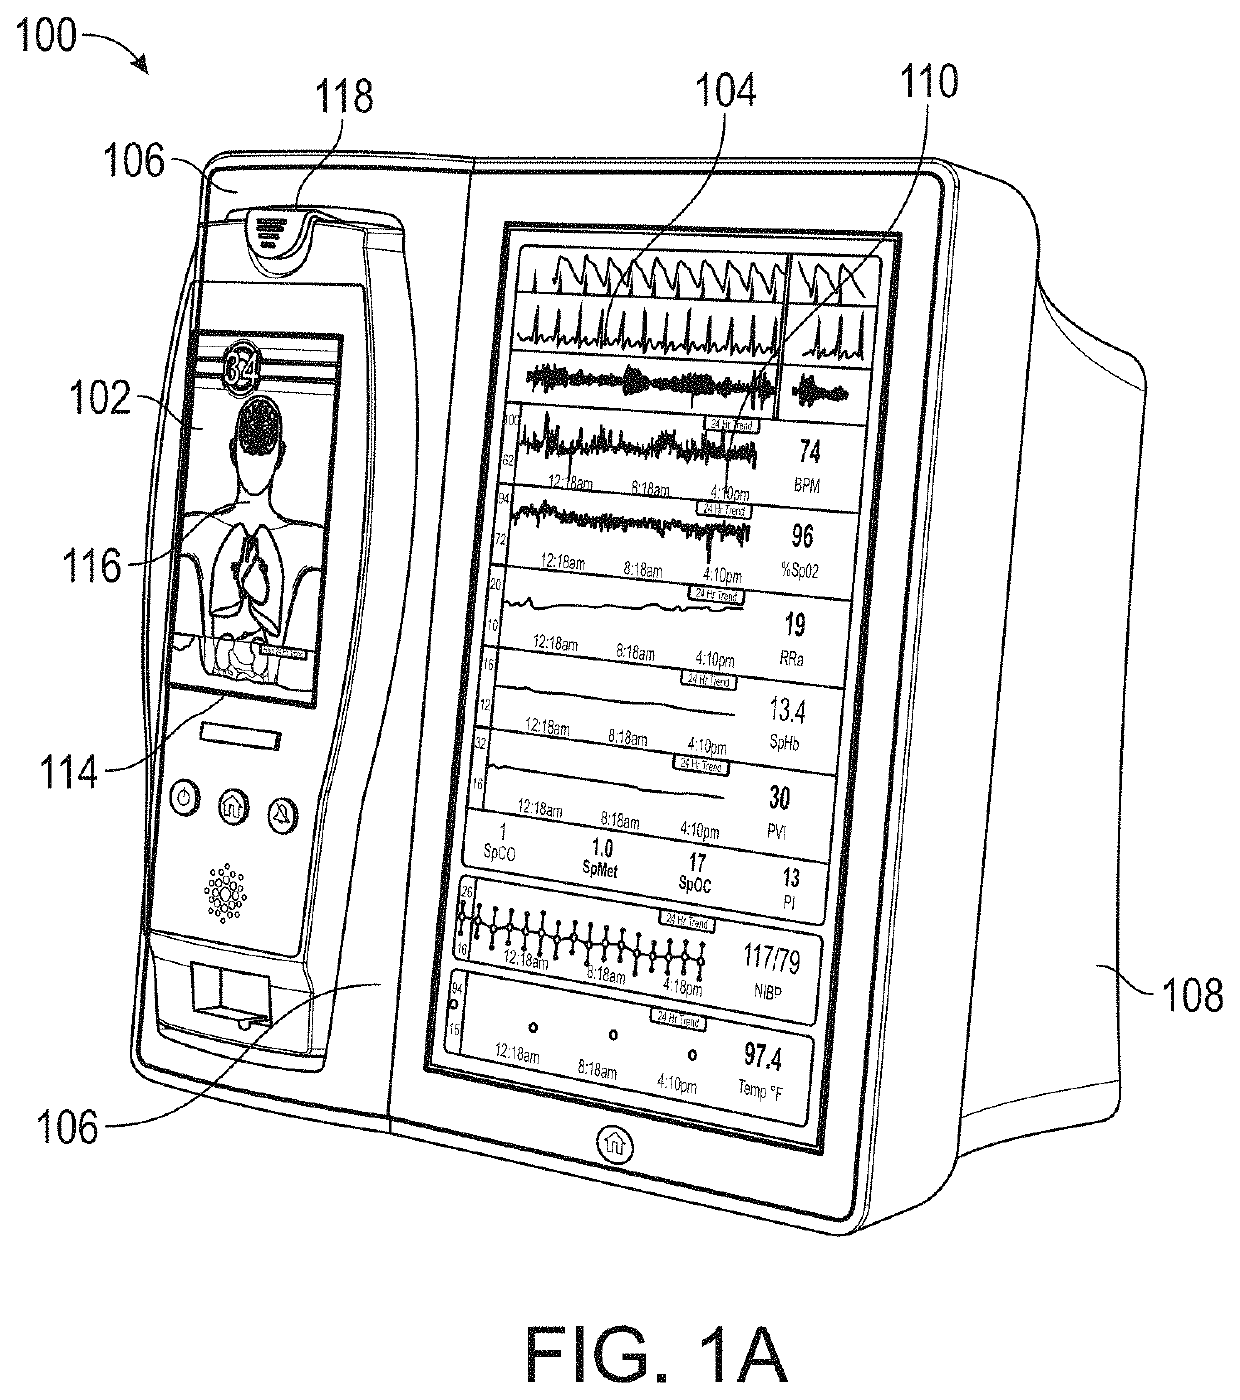 System for displaying and controlling medical monitoring data